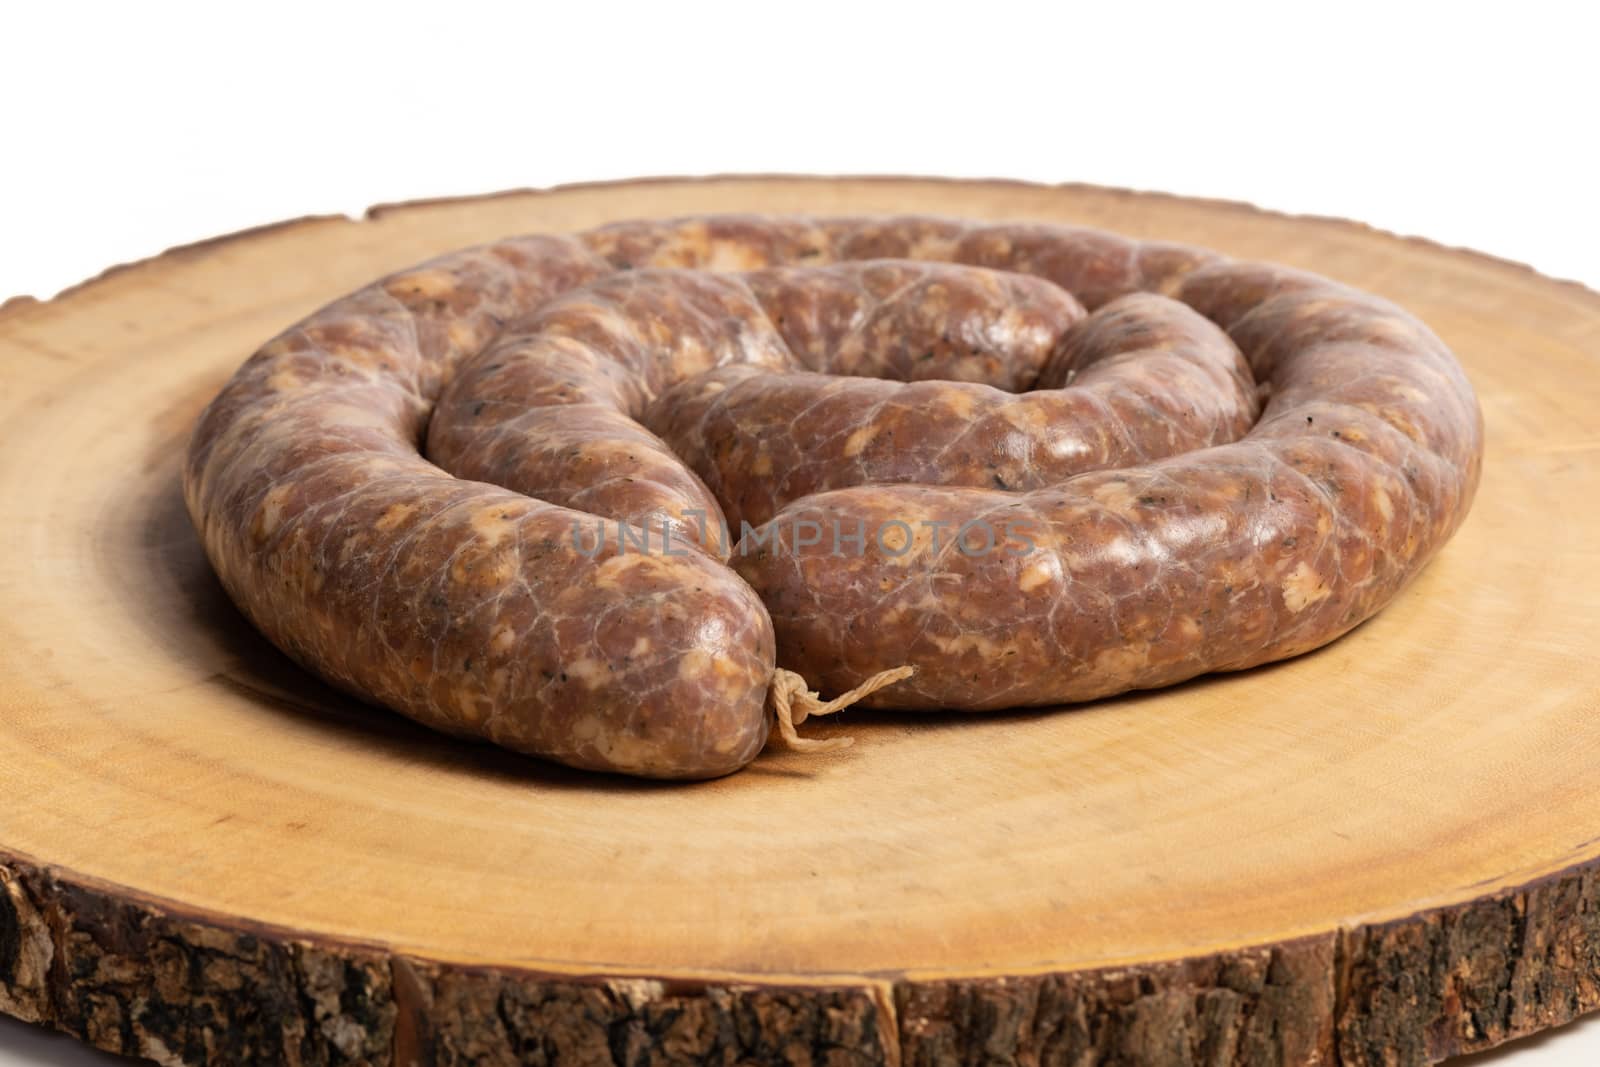 Raw homemade stuffed pork sausages isolated on a woodboard.